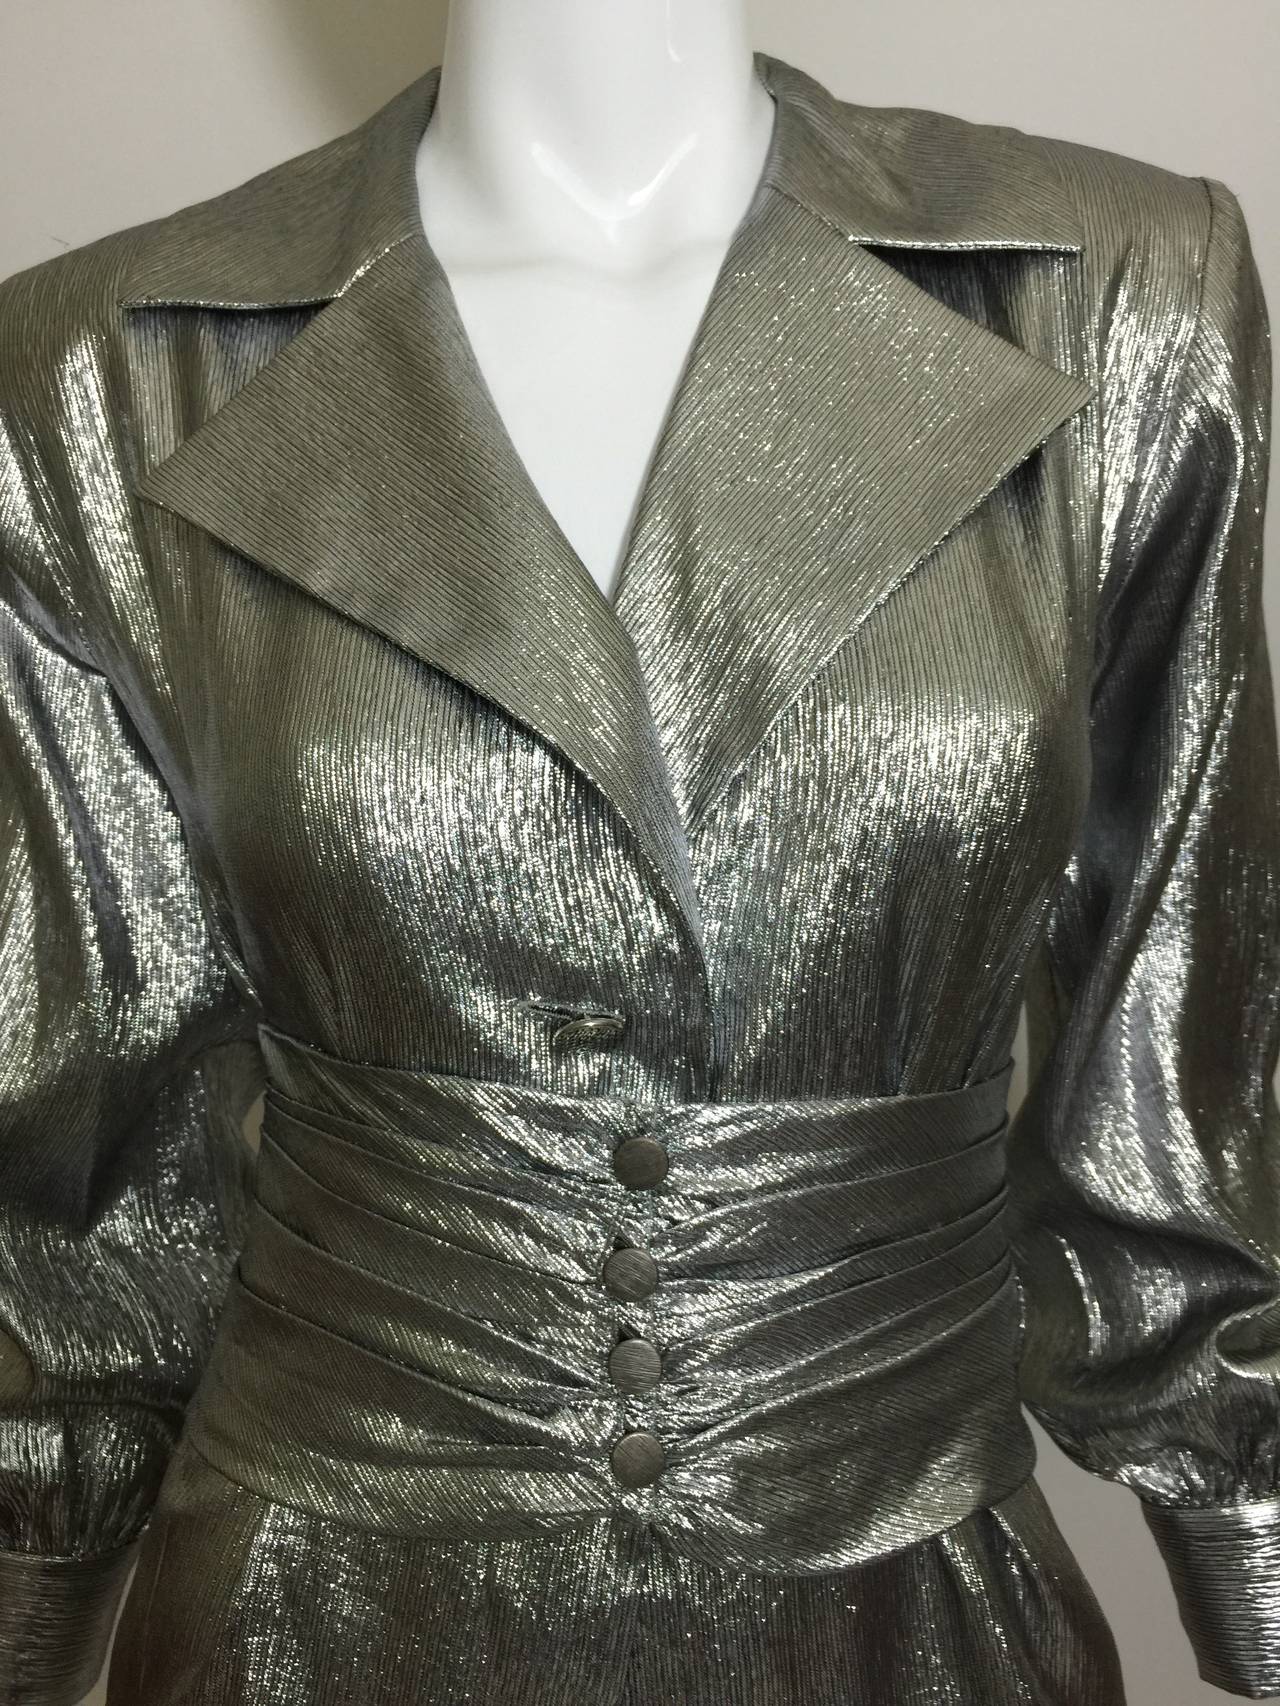 This is a vintage YSL  lightweight  gleaming metallic silver lame' blouse with  a matching wide five button ruched  belt 
The blouse has a relaxed fit with a 3 button front, and a single button cuff.
Lightly padded shoulders (pads can be cut out